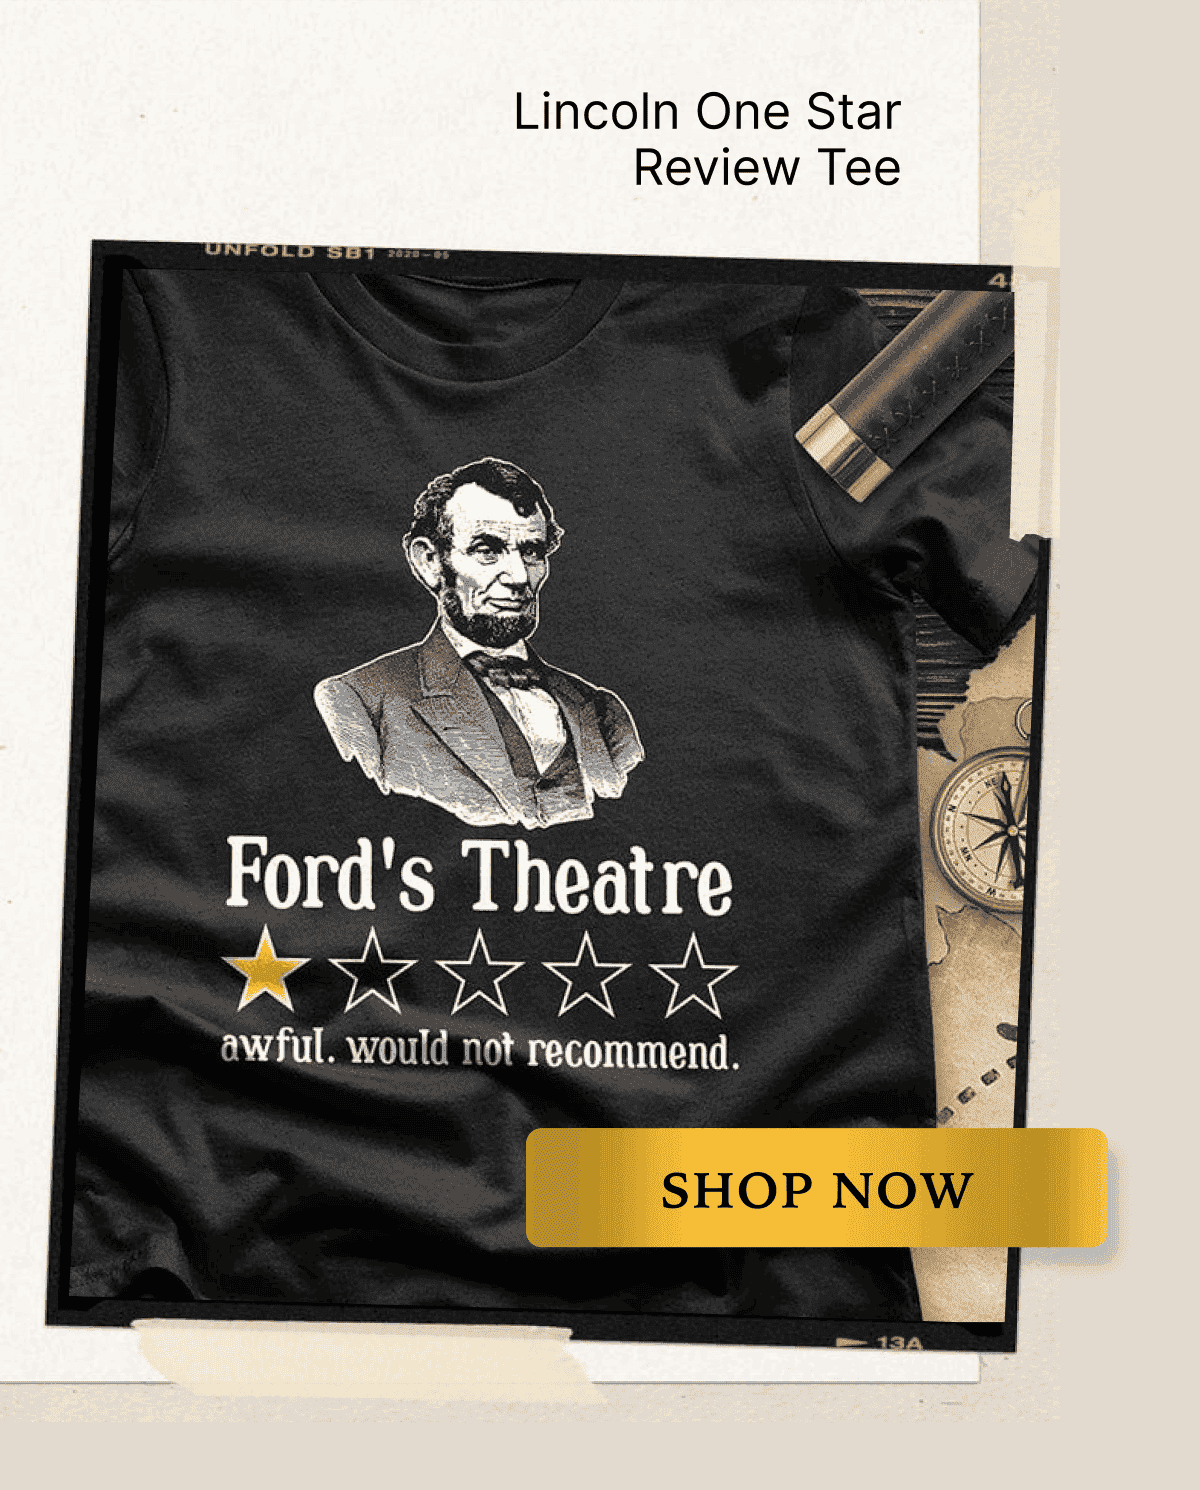 [Featured image of black tee with review of Ford’s Theatre]